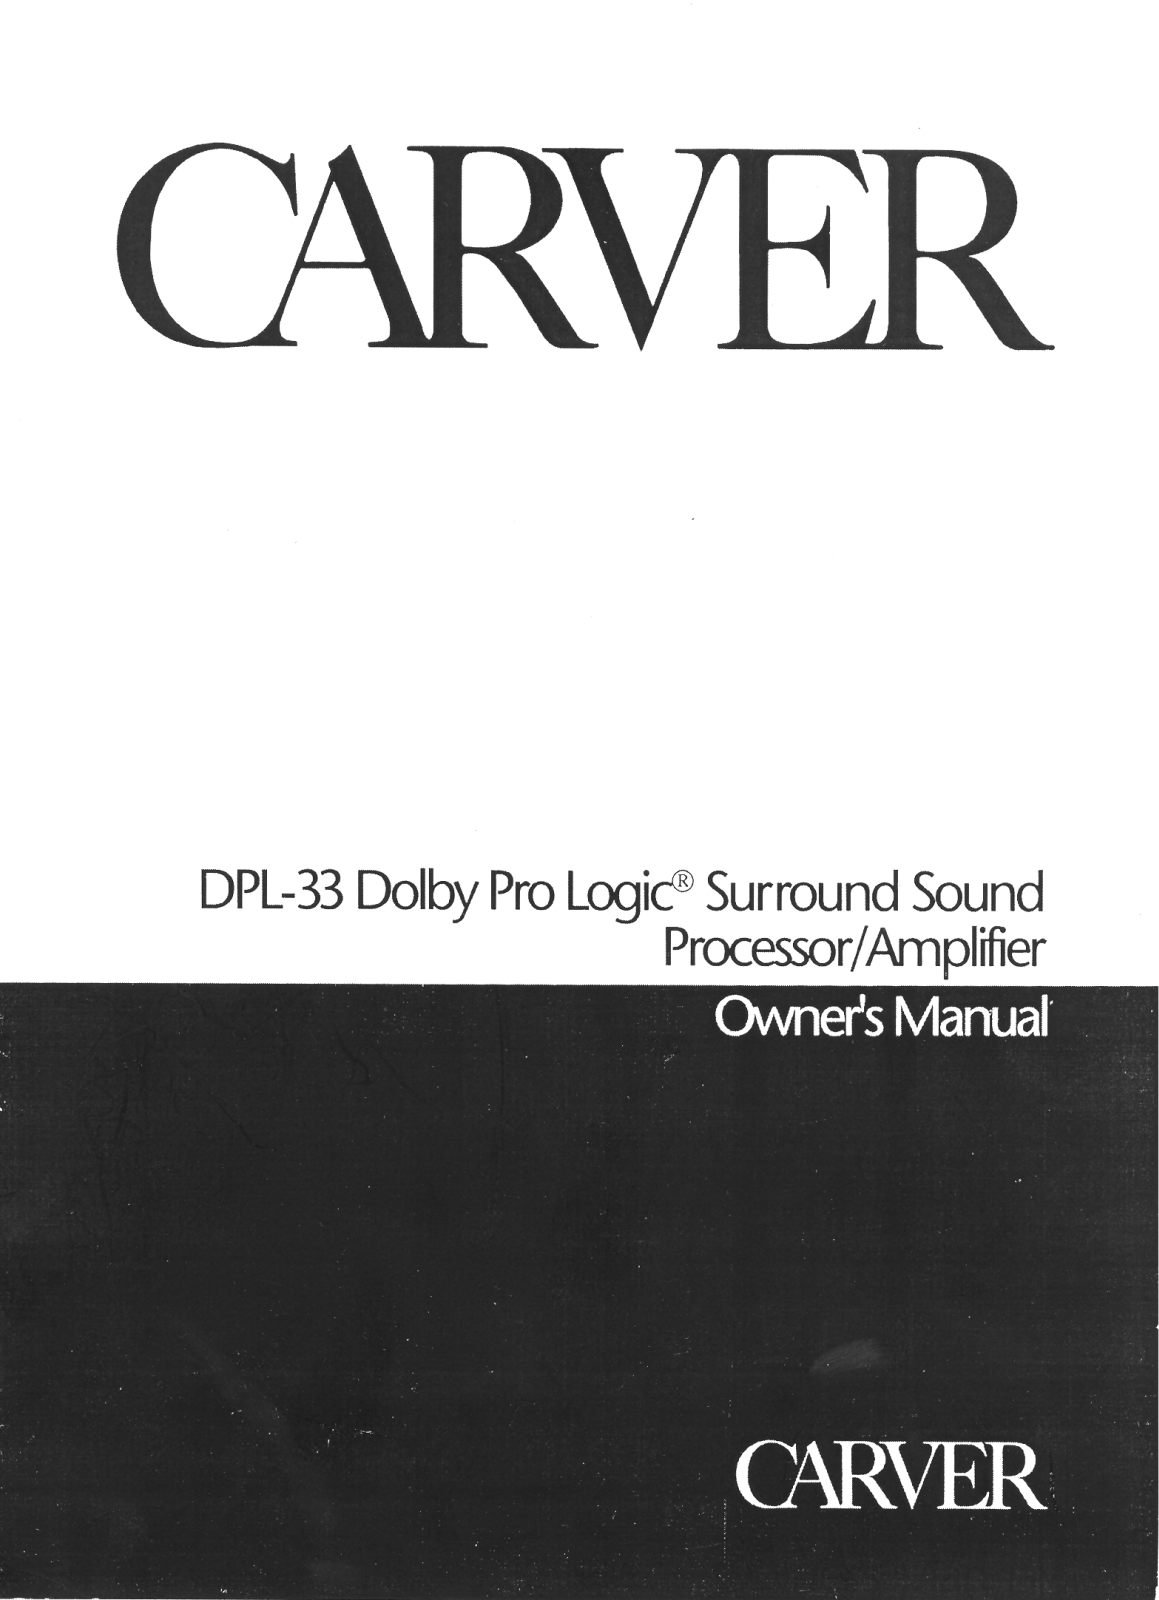 Carver DPL-33 Owners manual